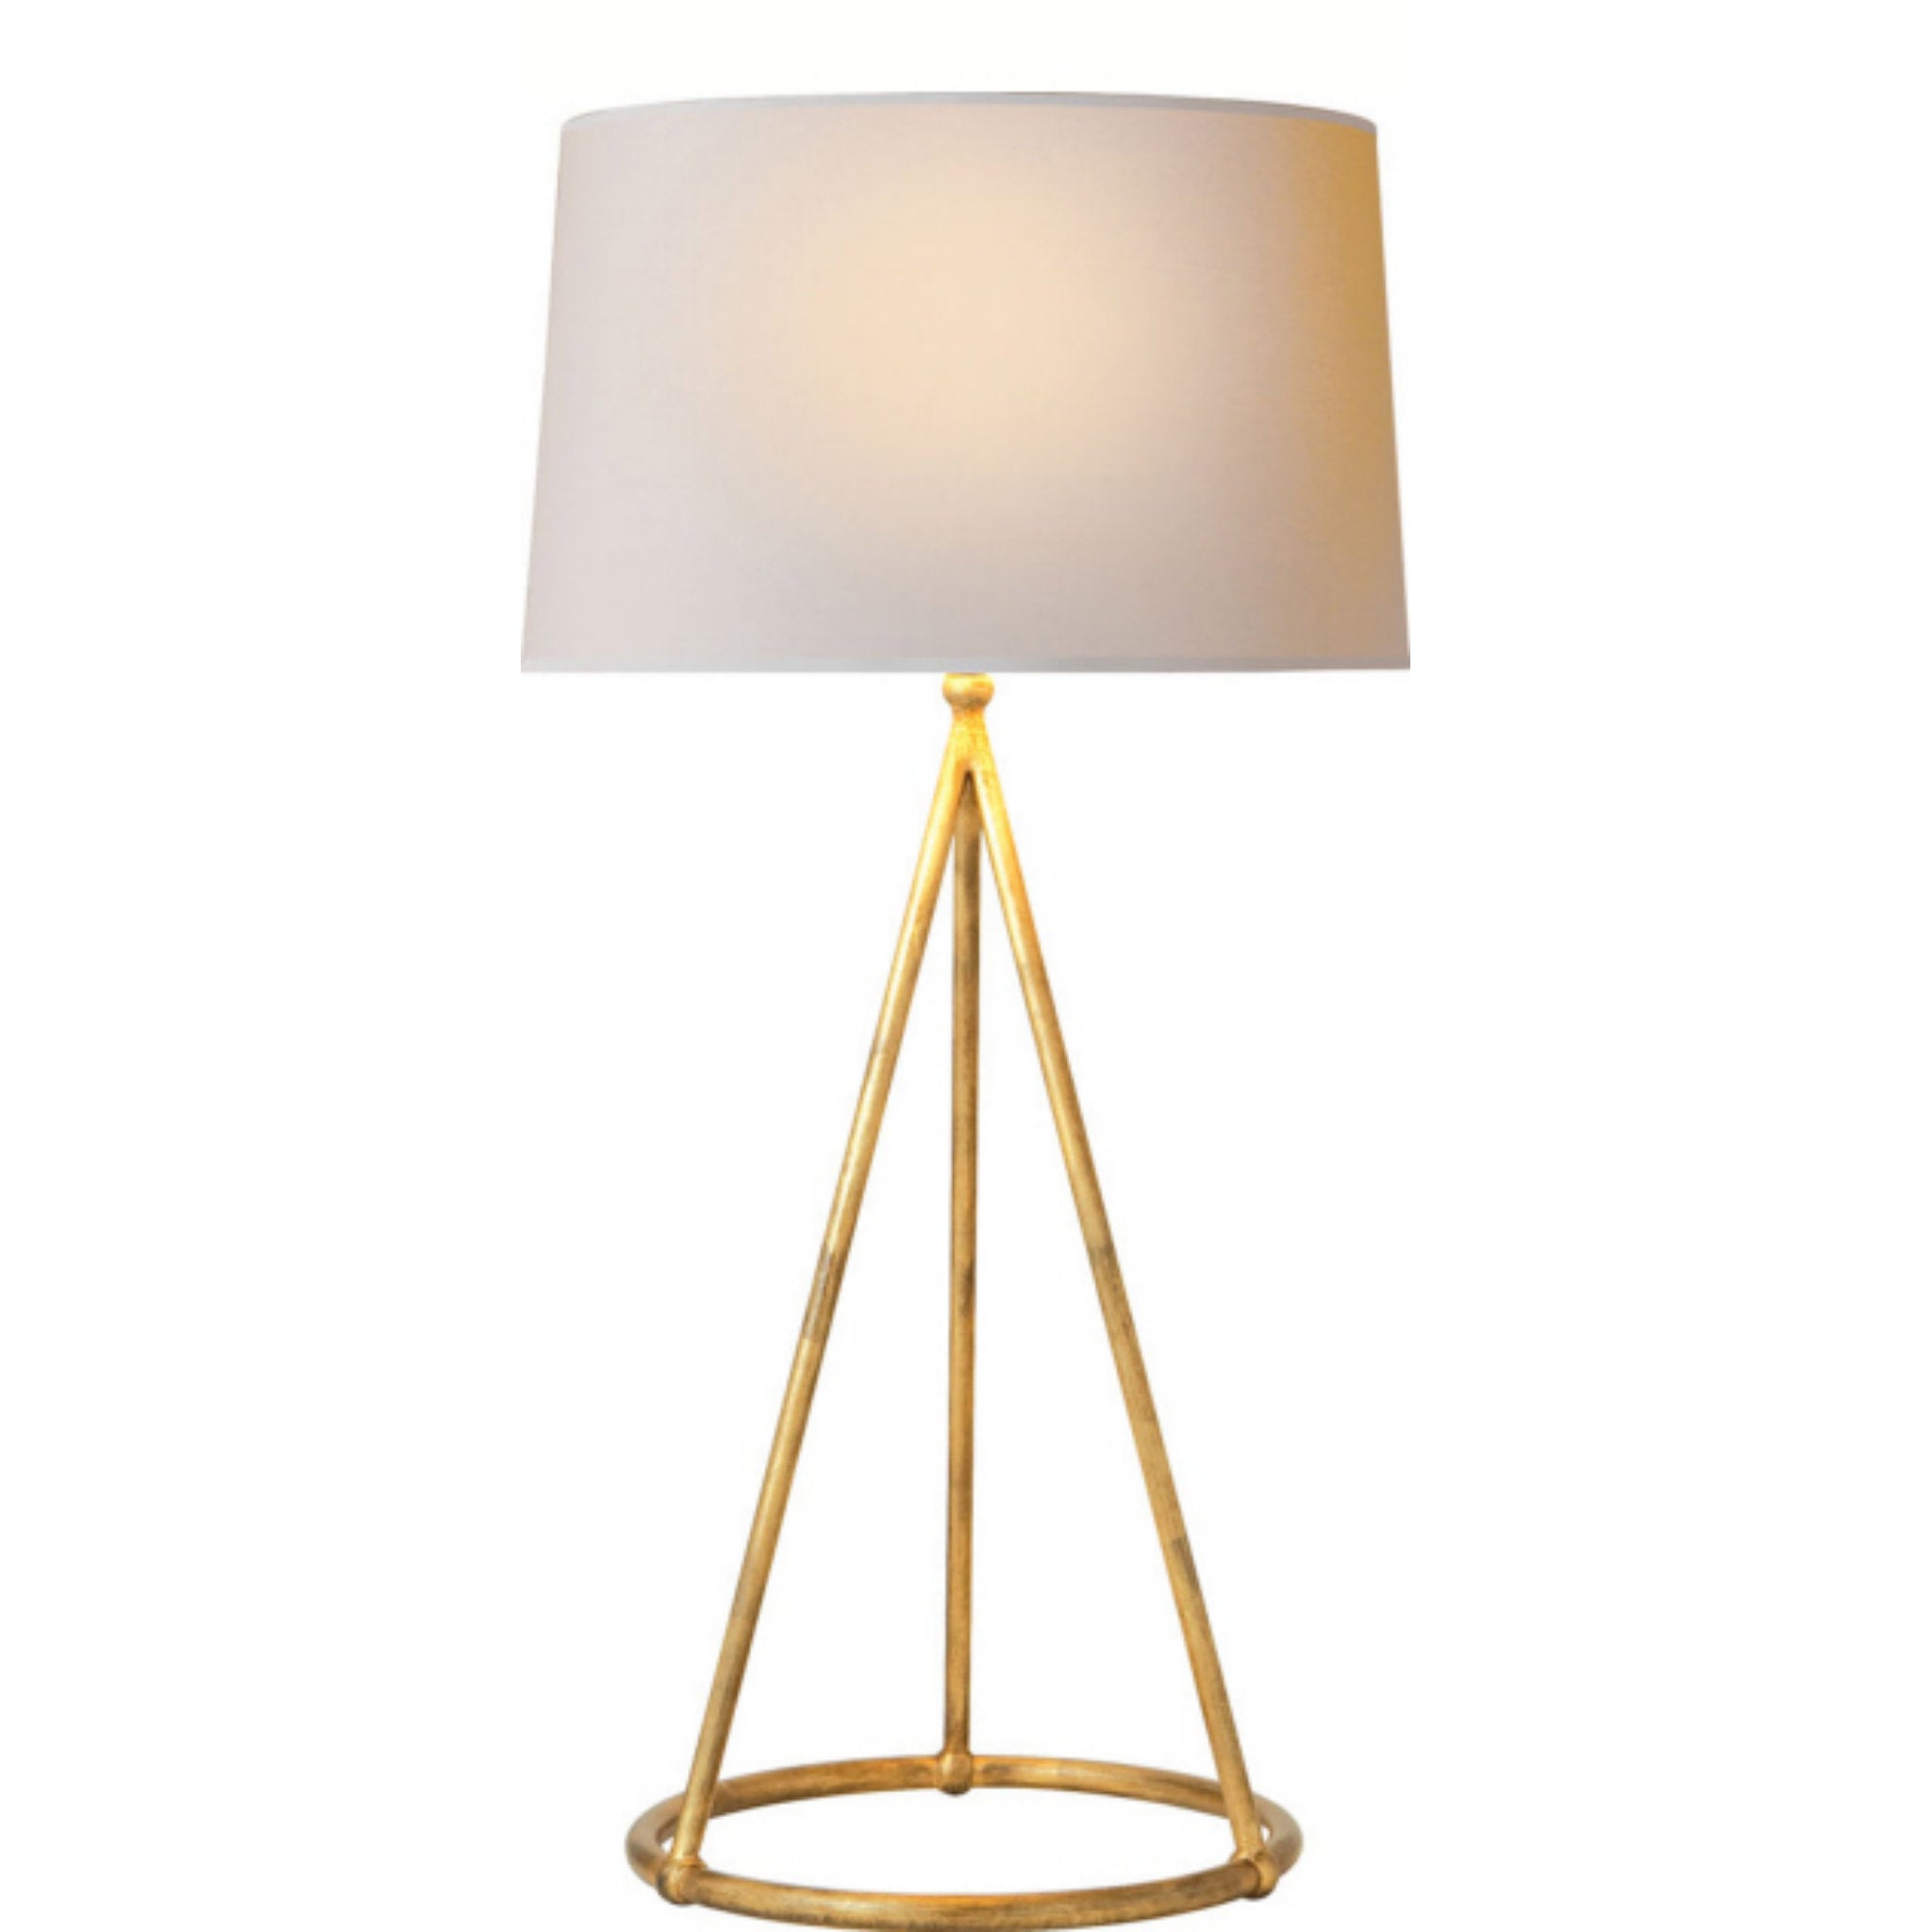 Thomas O'Brien Nina Tapered Table Lamp in Gilded Iron with Natural Paper Shade